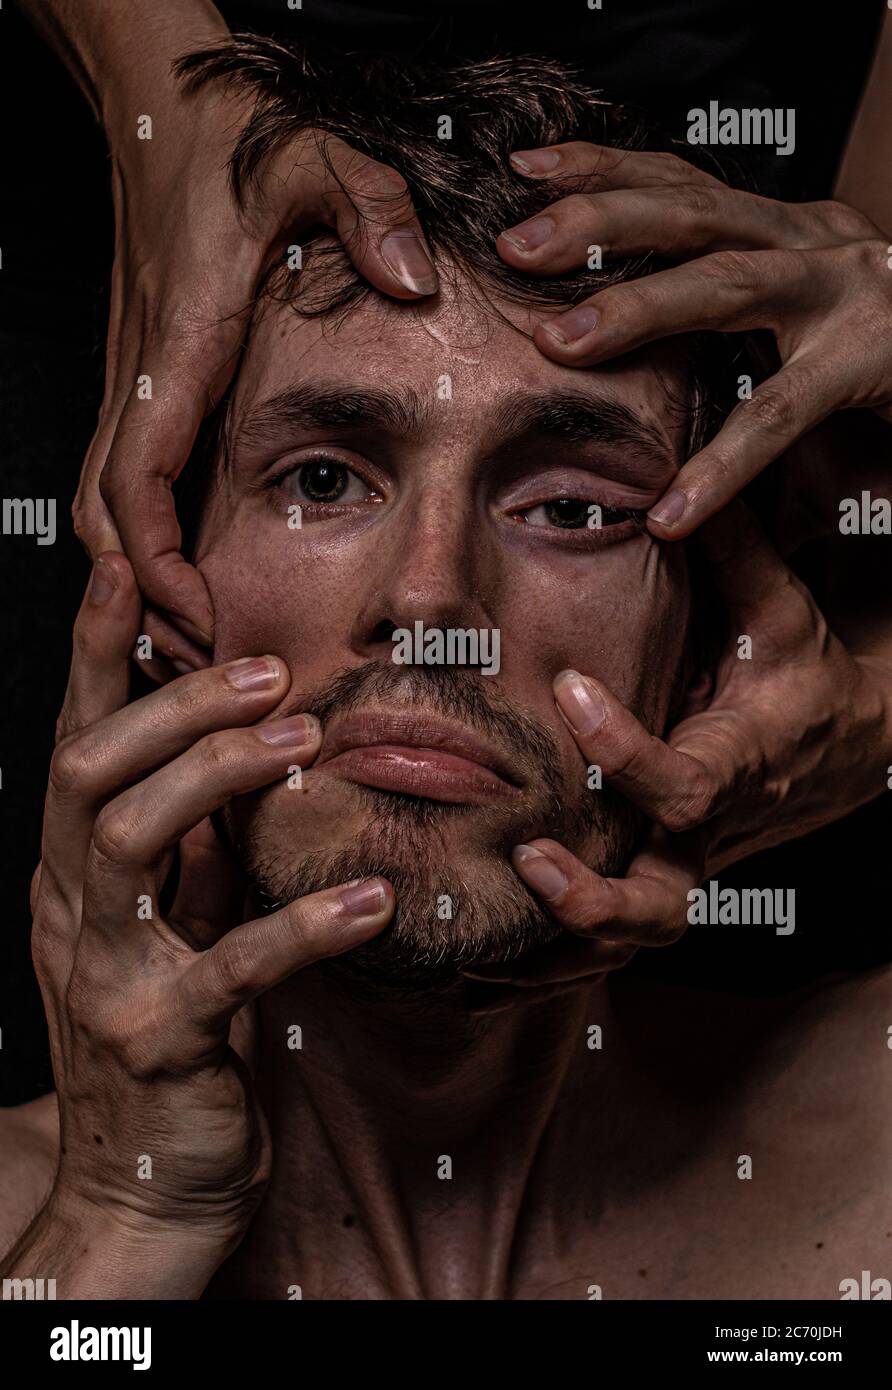 Four hands distort a mans face, he appears depressed and helpless Stock Photo